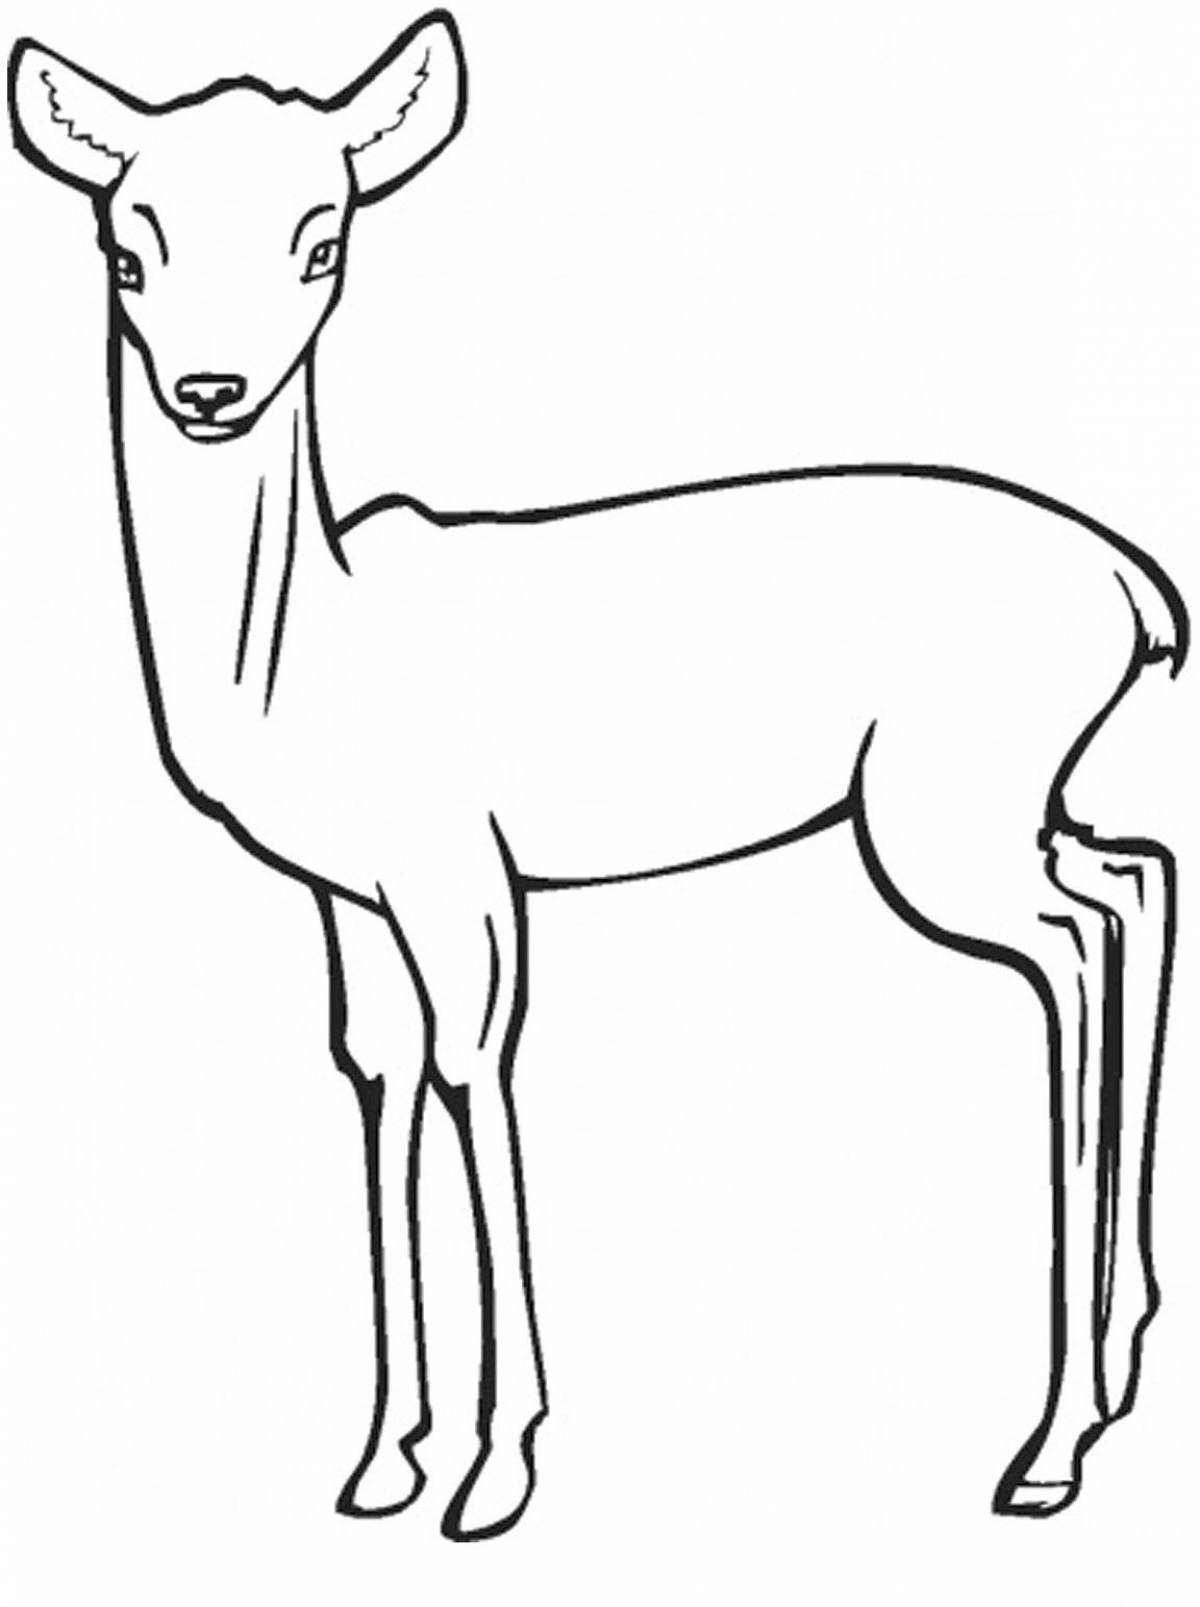 Magic roe deer coloring for the little ones